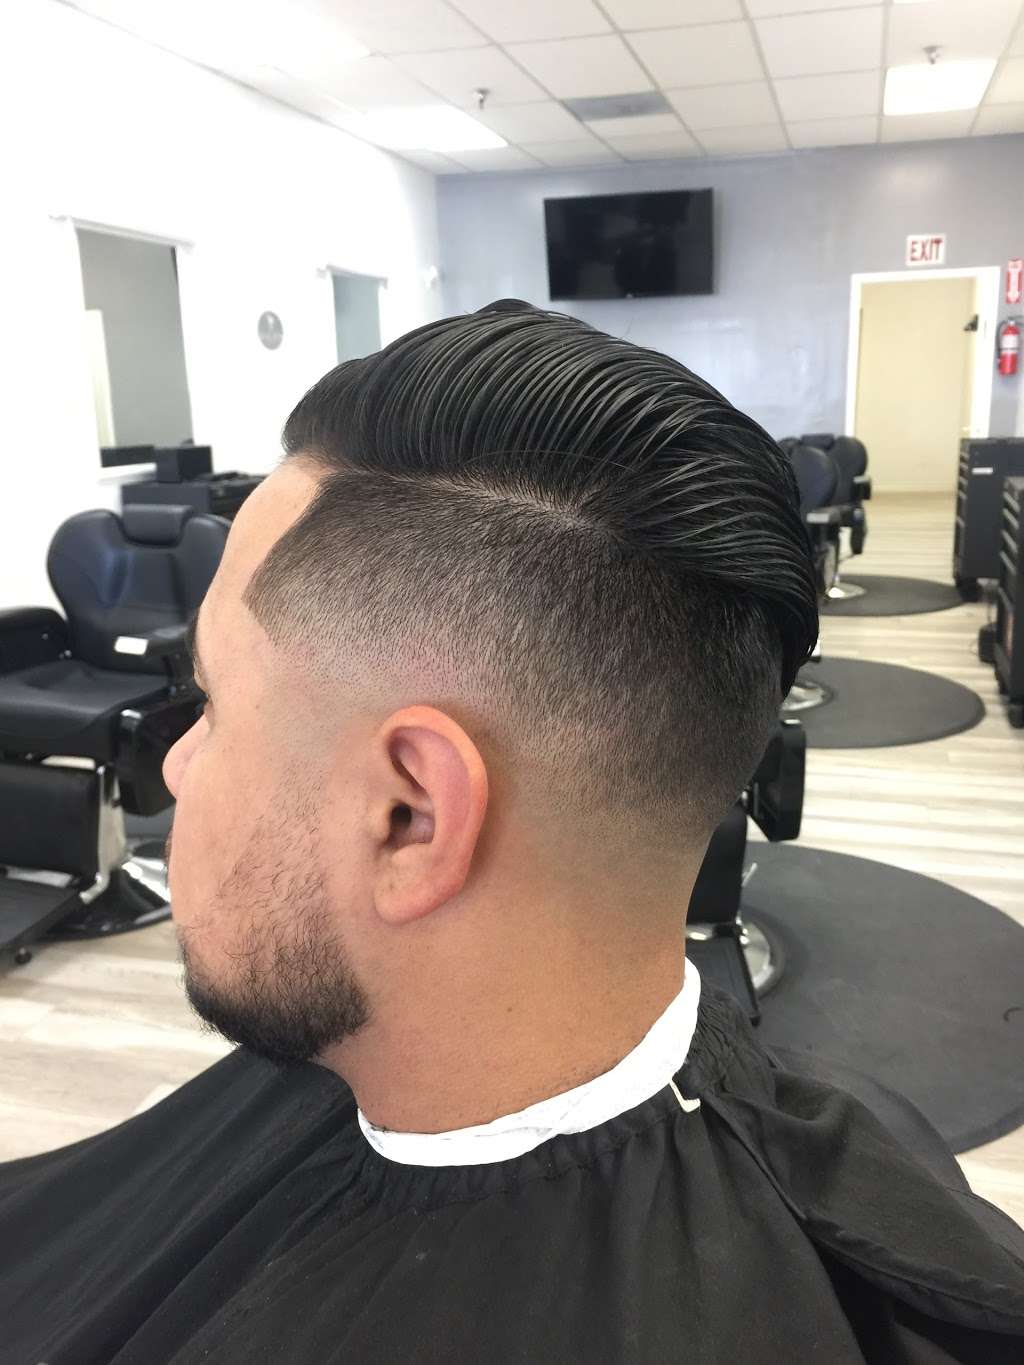 Authentic Cutz Barber Shop | 11875 Pigeon Pass Rd, Ste B15, Moreno Valley, CA 92557, USA | Phone: (951) 435-9495